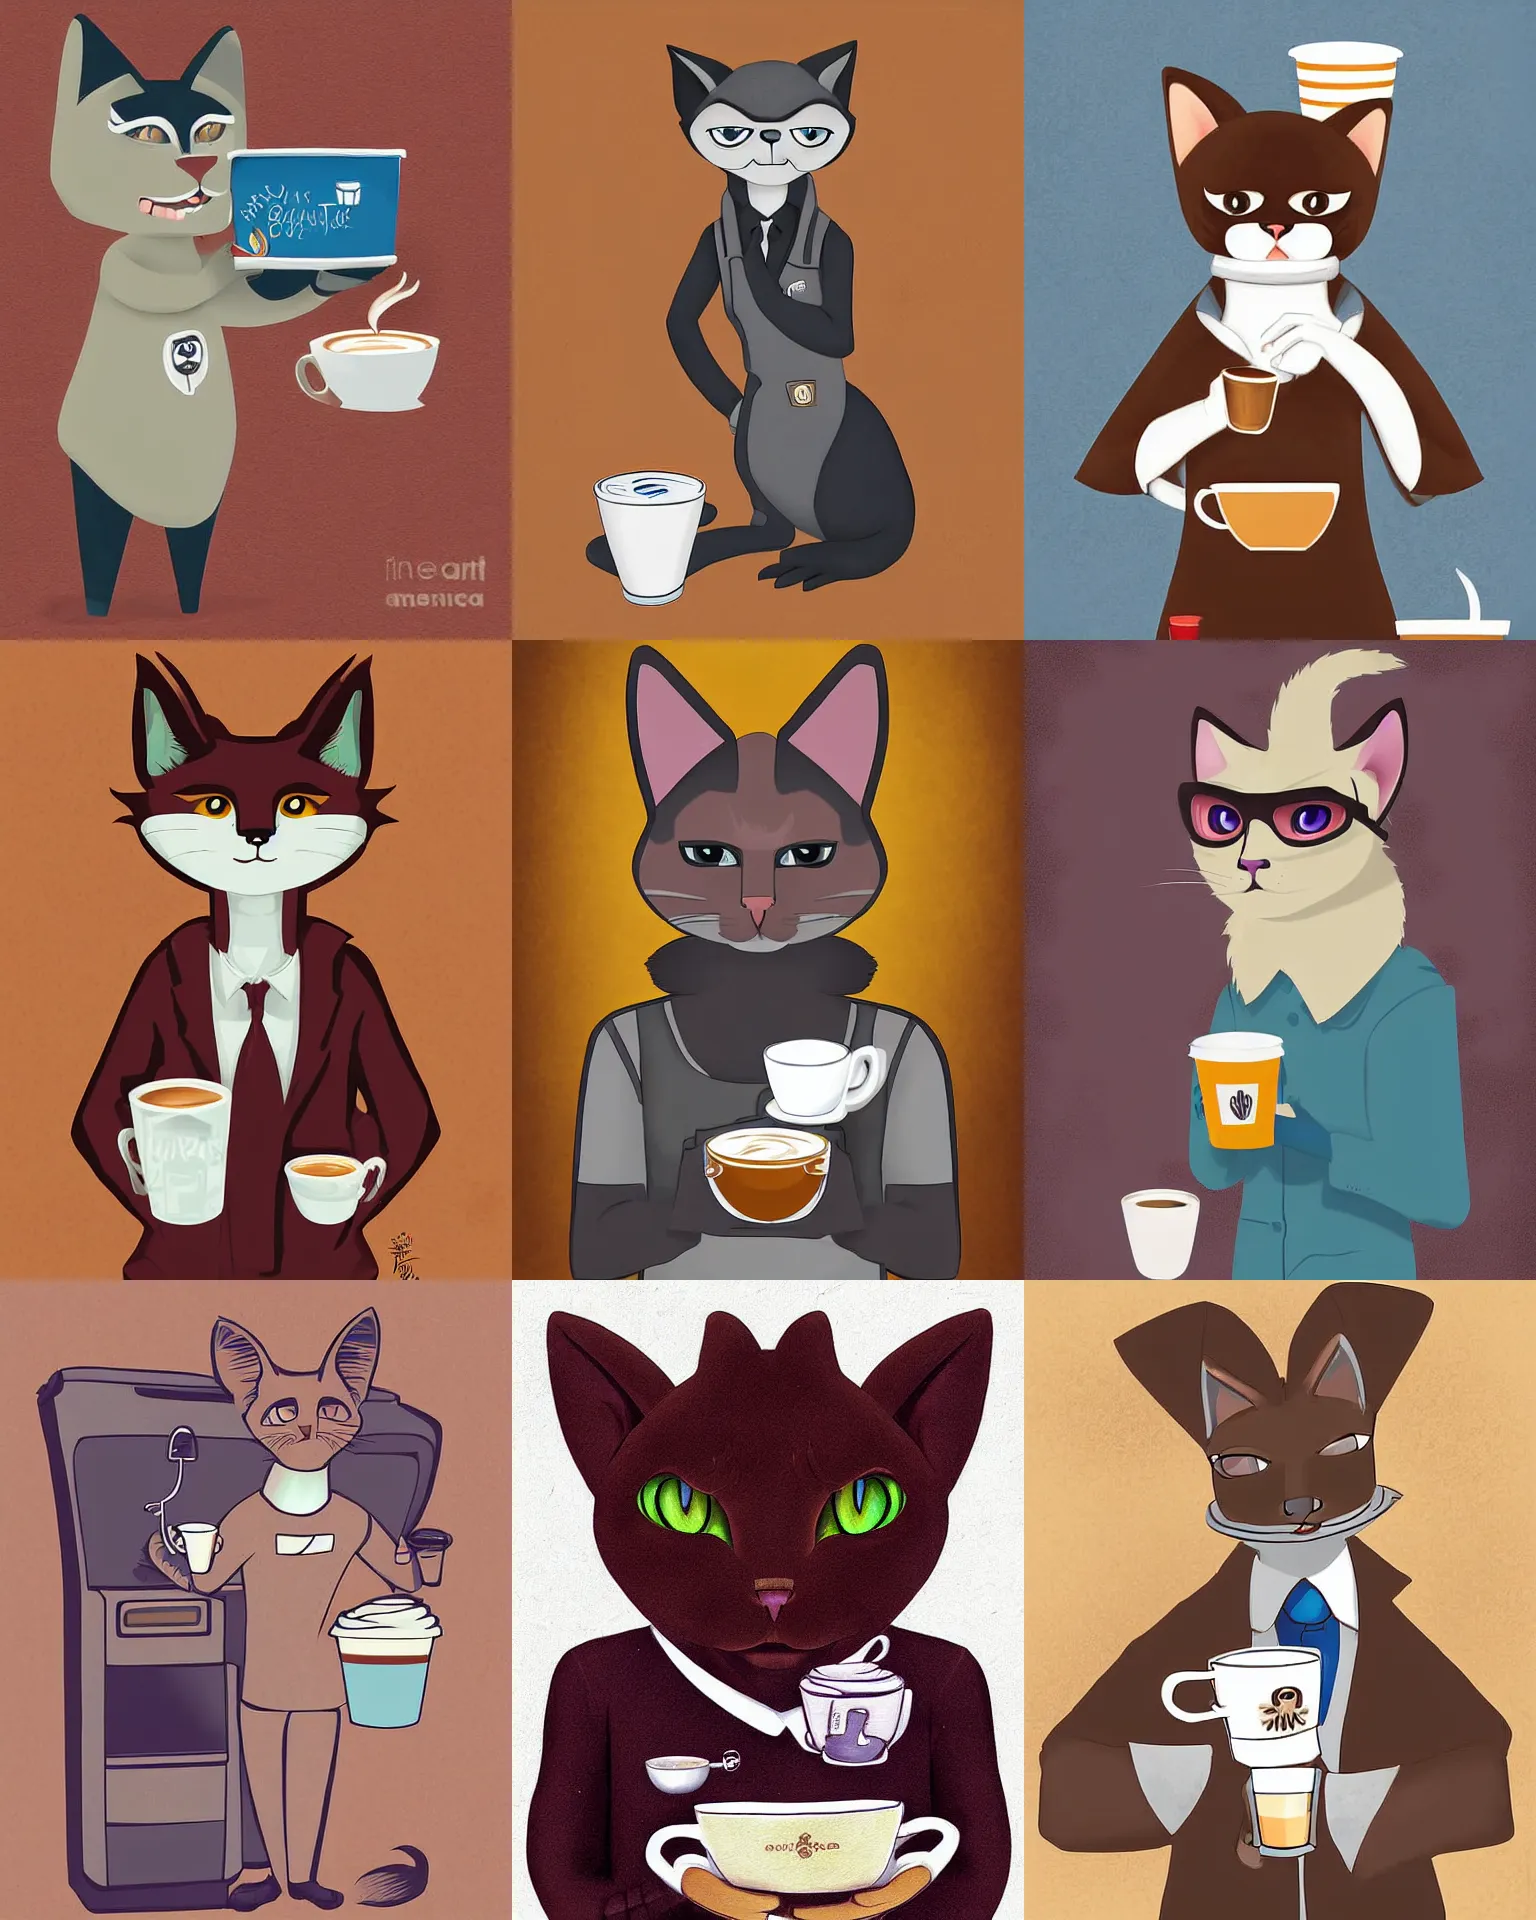 Prompt: digital art drawing of a male anthropomorphic siamese cat furry fursona wearing a barista uniform holding a latte, by jay naylor, rukis, nomax, kenket